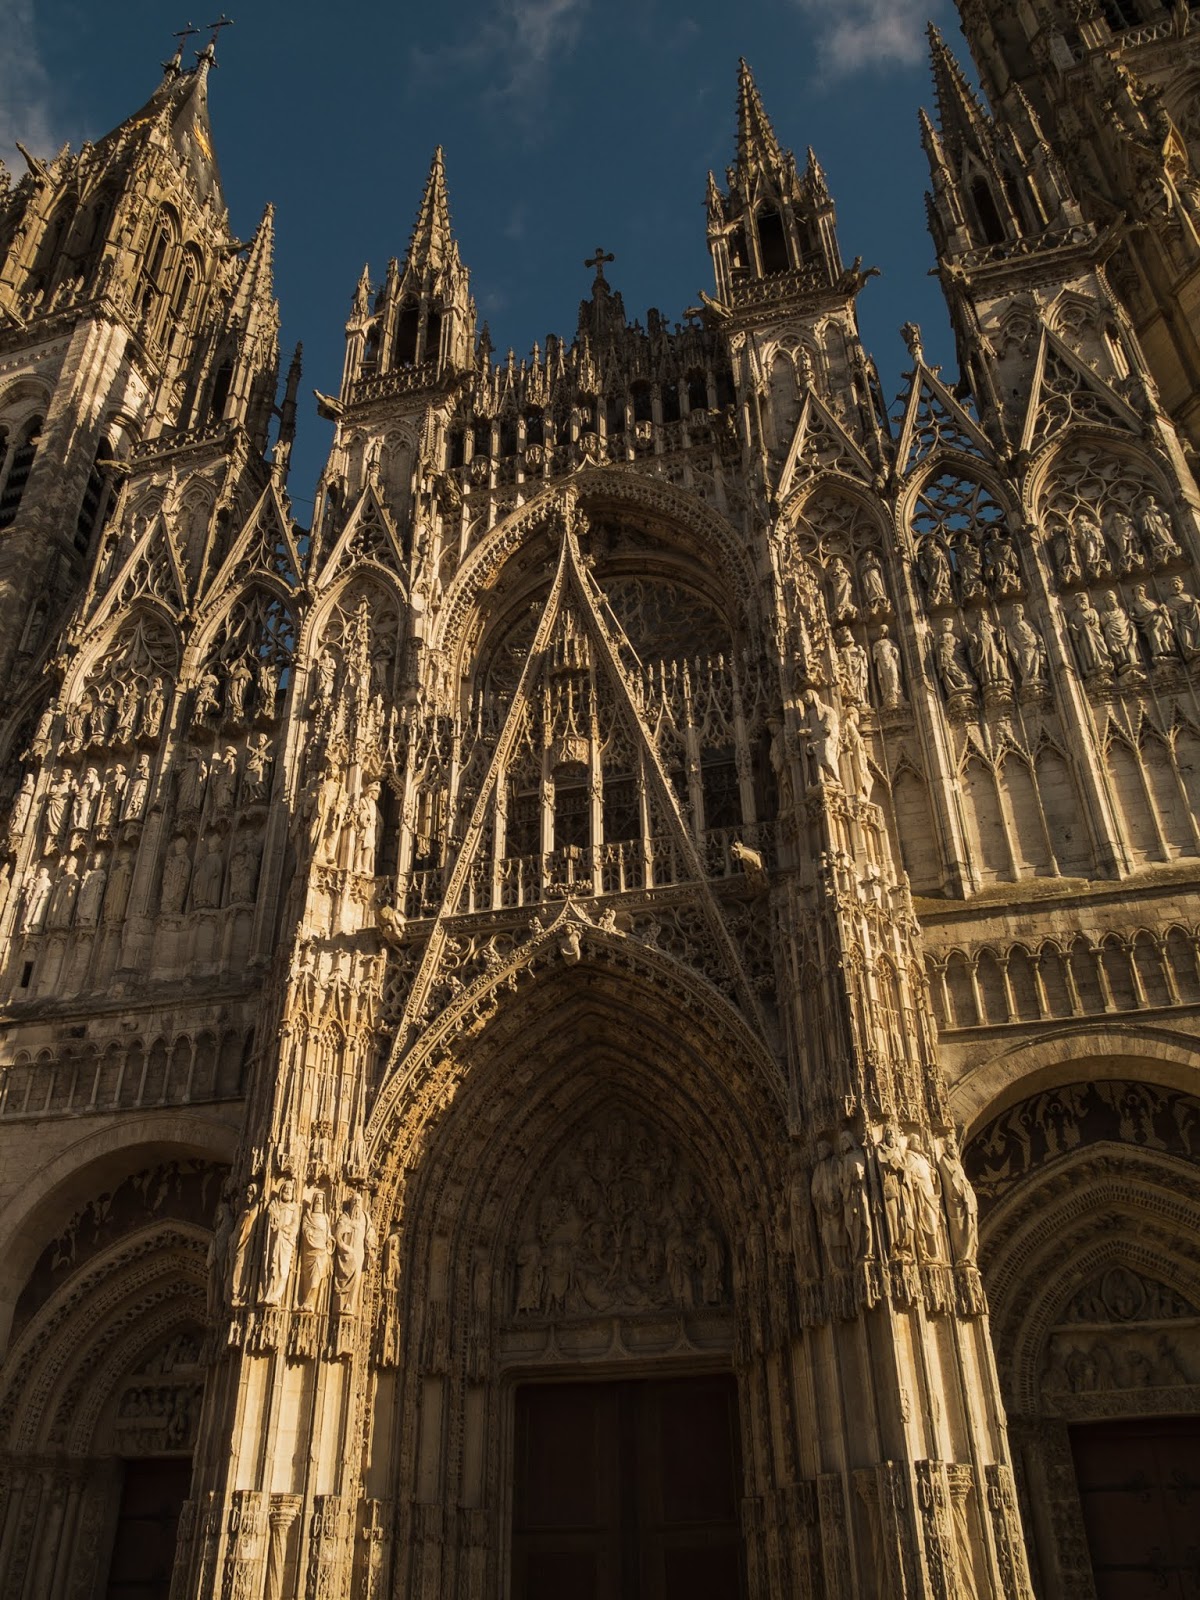 Sun shining on the front of the Cathedral in Rouen, France.